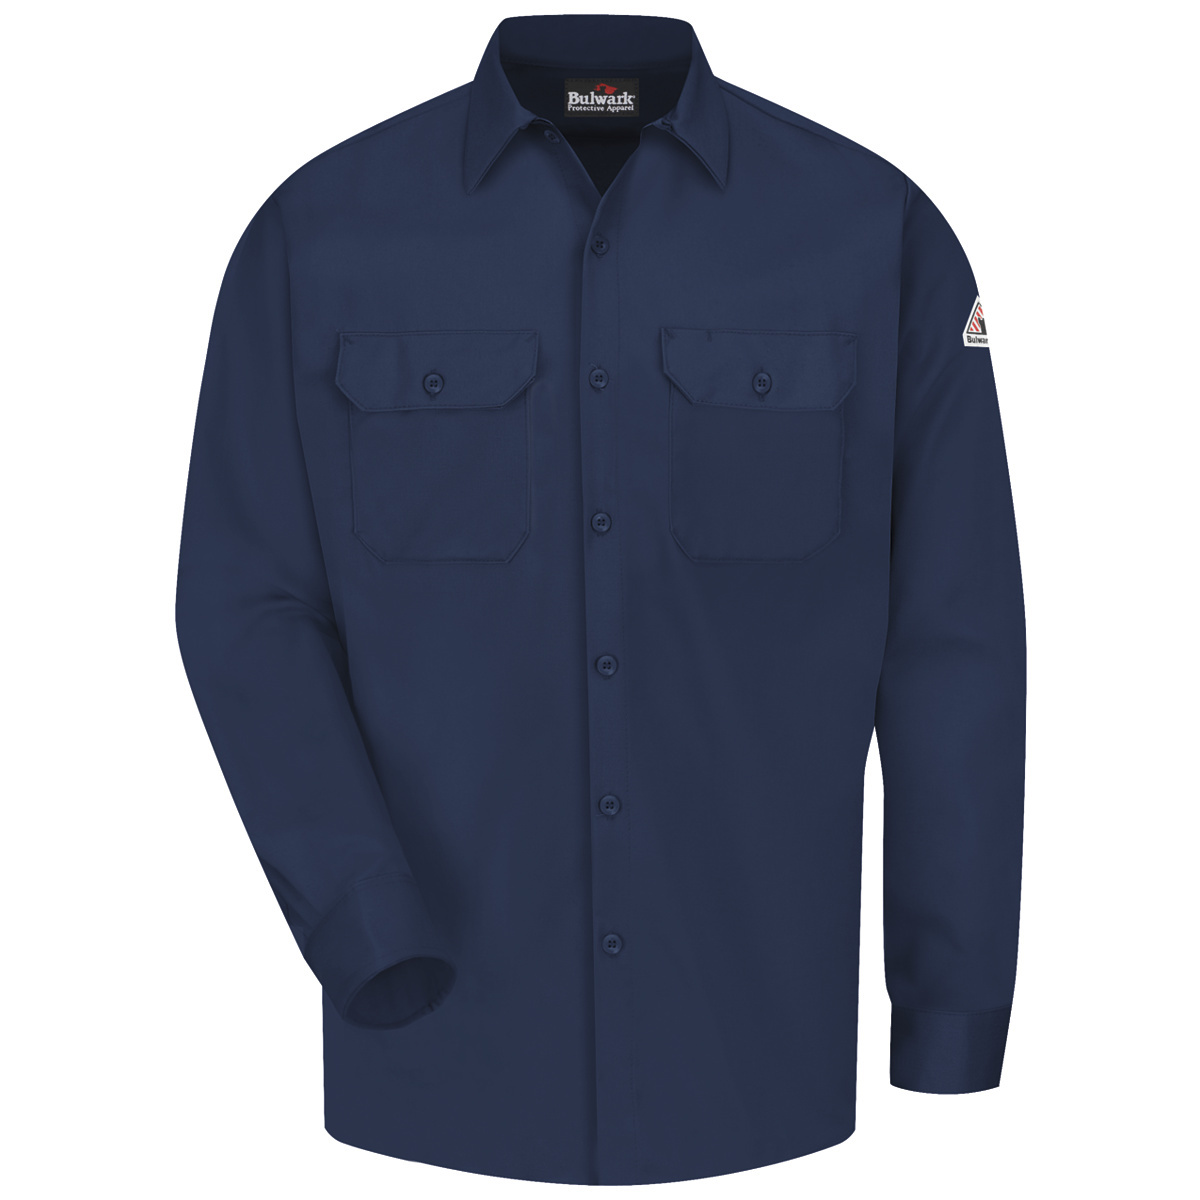 Bulwark® 6X Tall Navy Blue Westex Ultrasoft®/Cotton/Nylon Flame Resistant Work Shirt With Button Front Closure